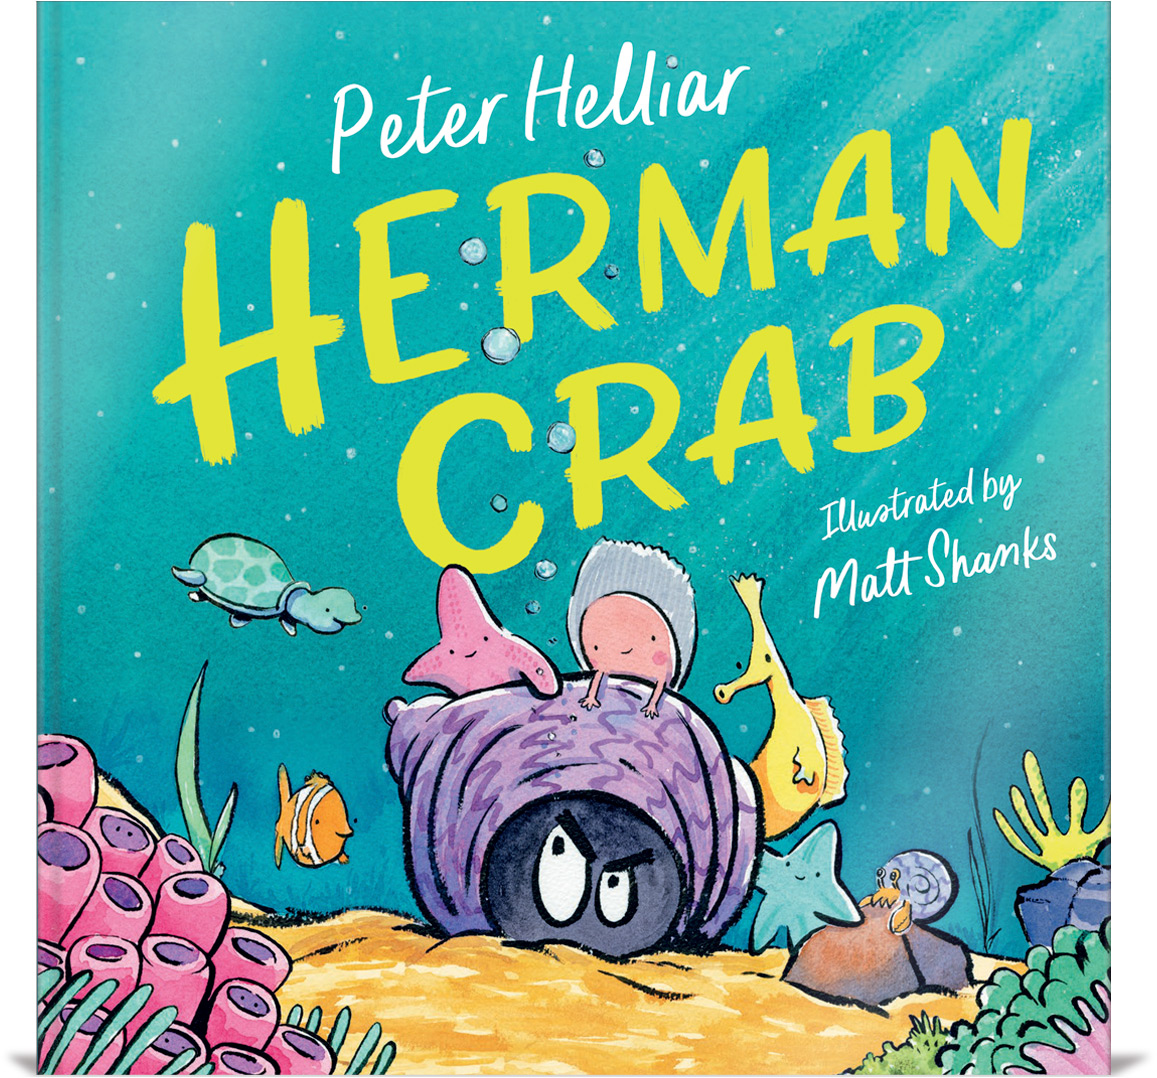 Picture book cover: Two angry hermit crab eyes peering out from within it's shell at a friendly starfish, seahorse, oyster, and other sea creatures